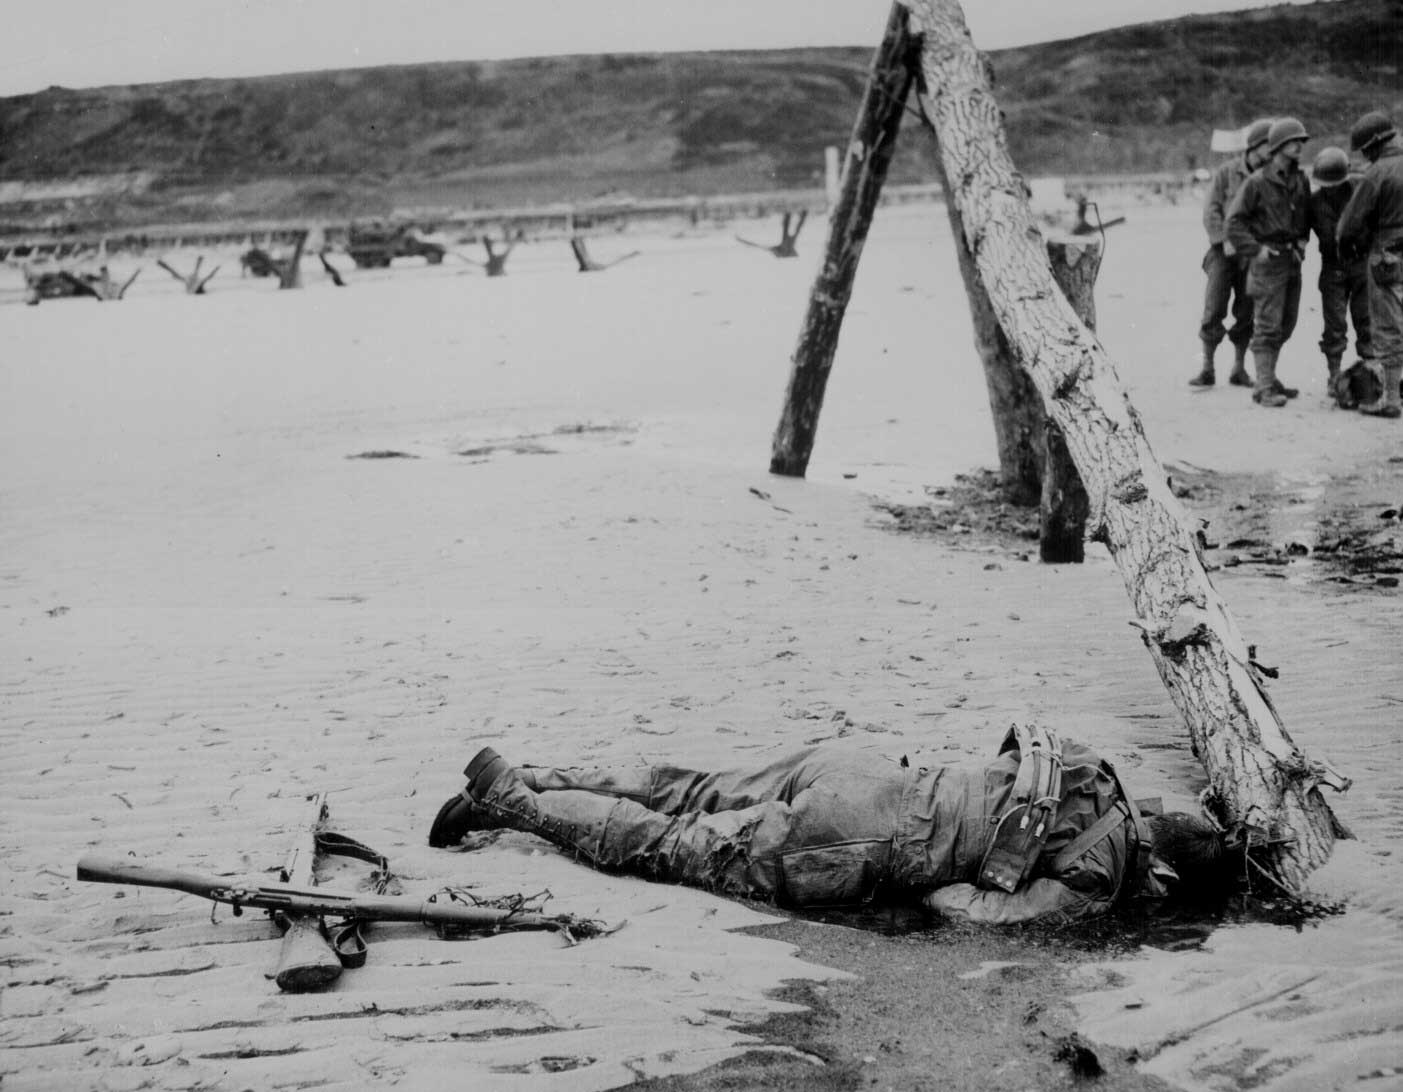 Next to a fallen soldier, a fellow comrade formed a cross with rifles to pay his respects, Normandy, France, Jun 1944